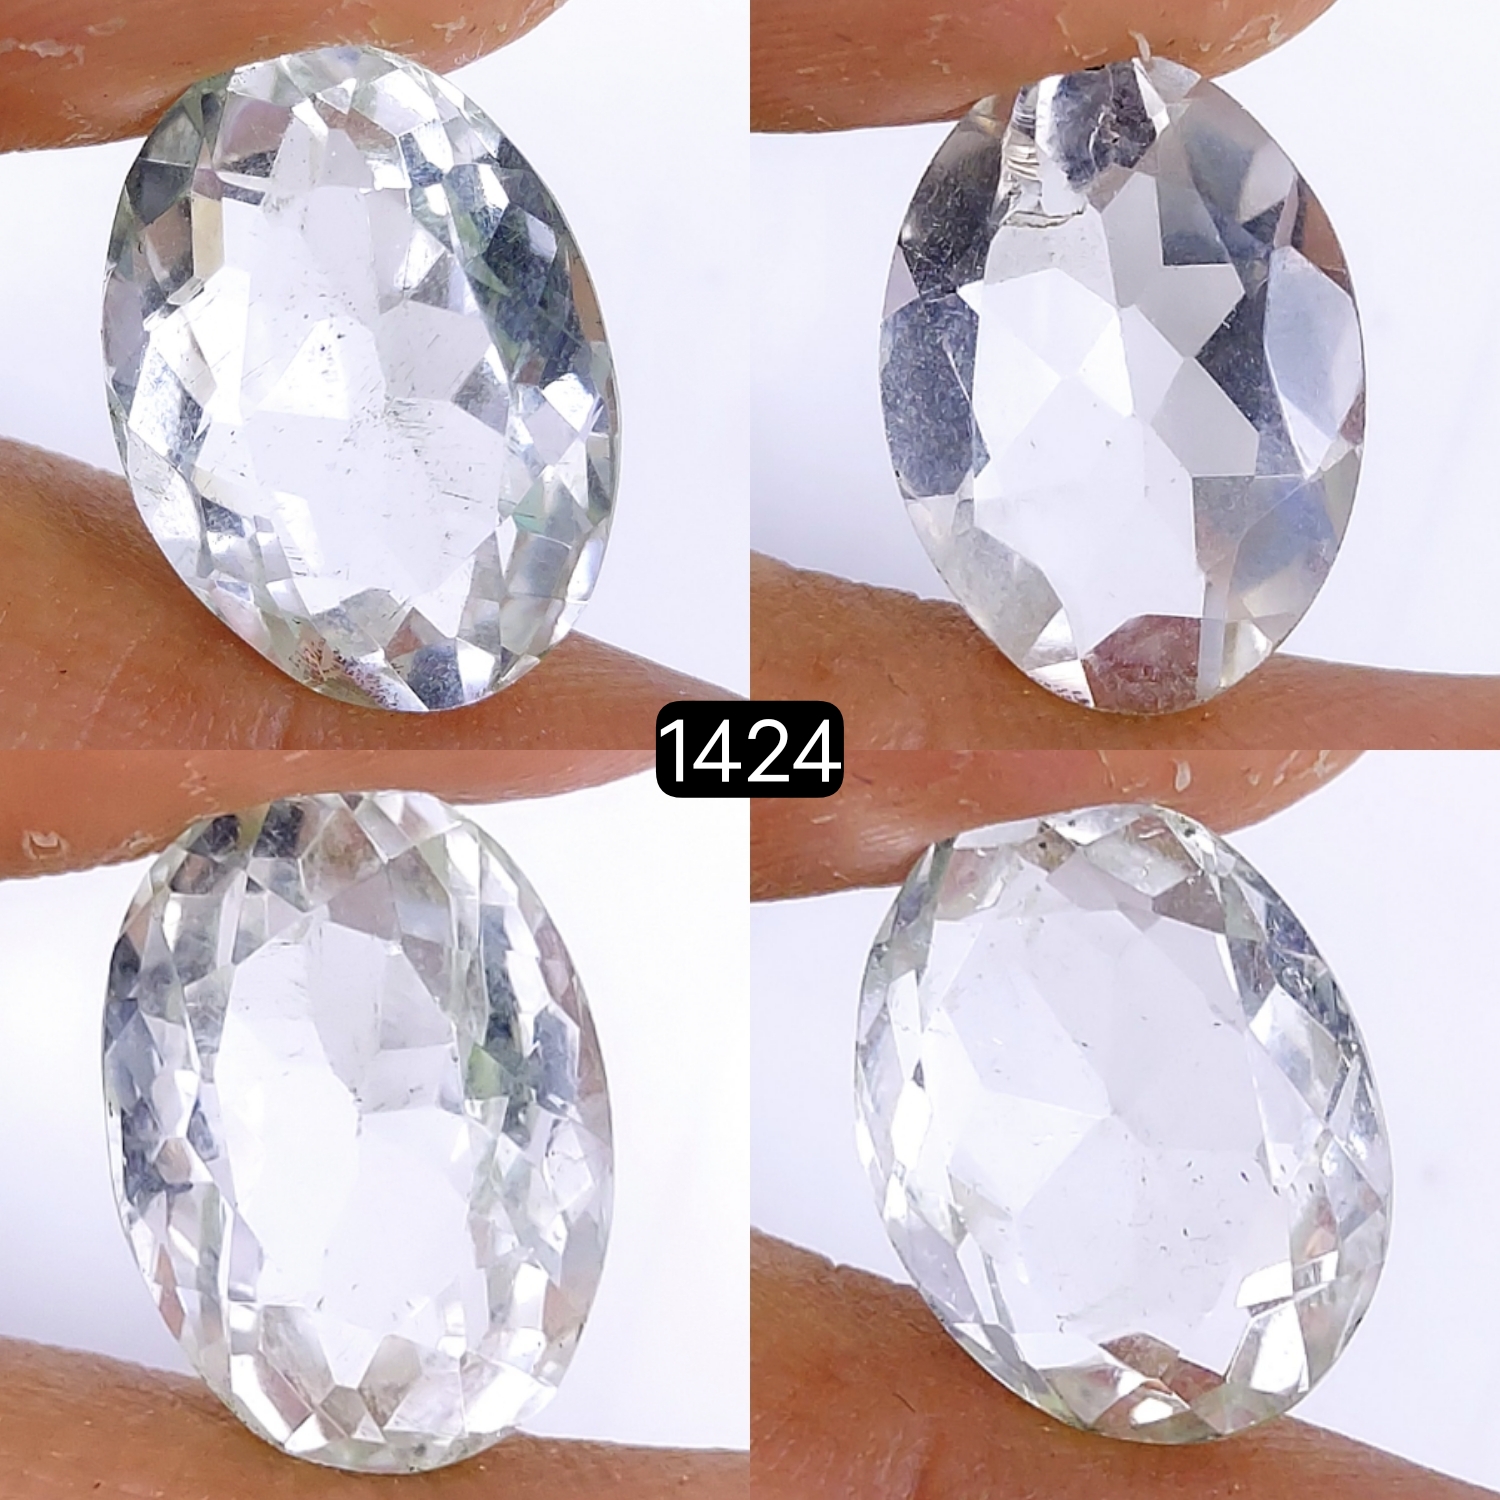 4Pcs 43Cts Natural Crystal Quartz Faceted Cabochon Gemstone Clear Quartz Crystal Loose Gemstone for Jewelry Making Mixed Shape Pendents 20x15 17x13 mm#1424